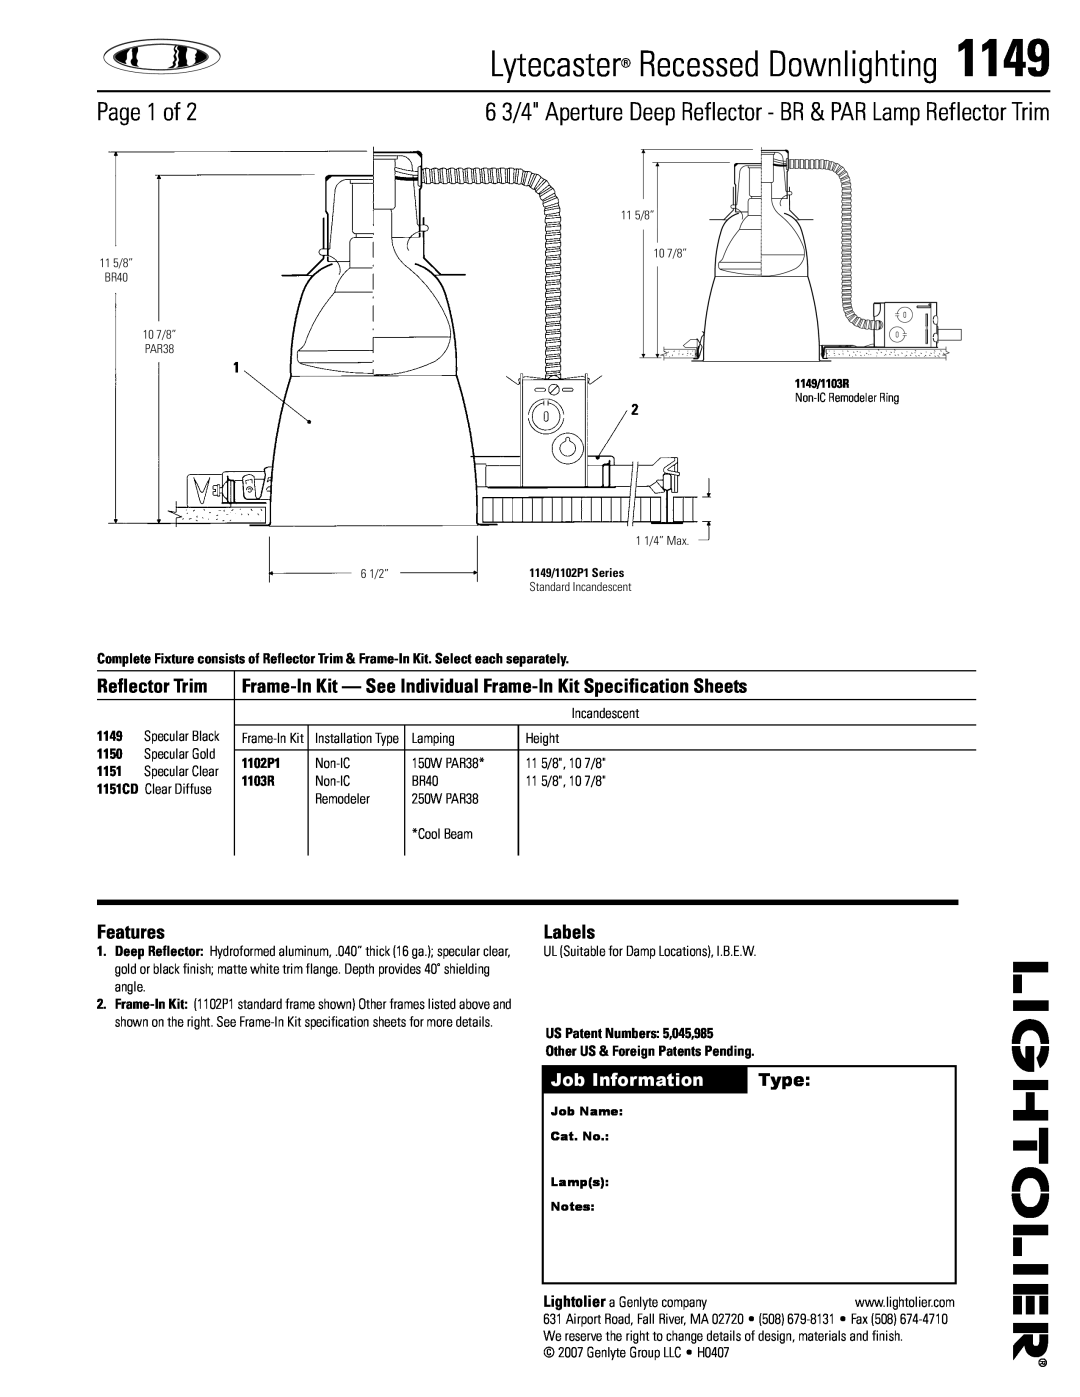 Lightolier 1149 specifications Lytecaster Recessed Downlighting, Page  of, Job Information, Type, Reflector Trim, Labels 